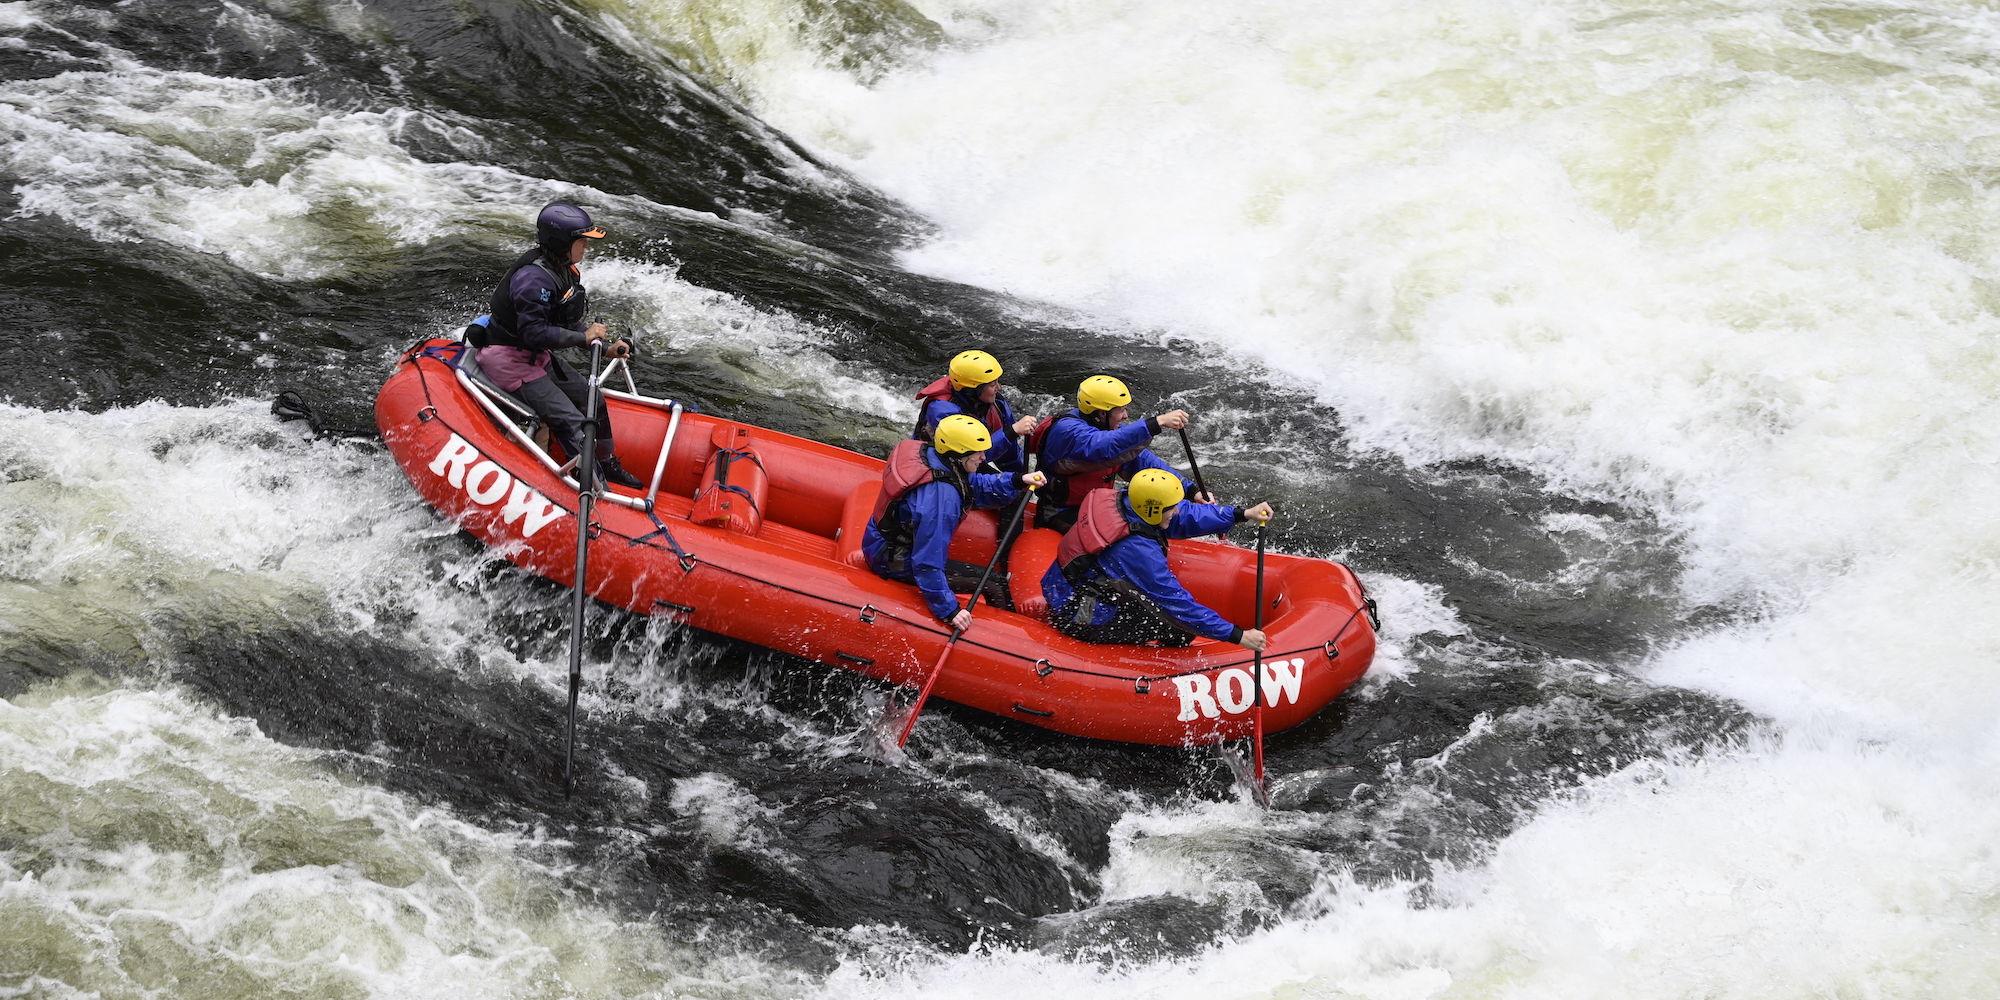 A red raft full of paddlers and a guide on a stern frame in the back paddling through a rapid on the Lochsa River